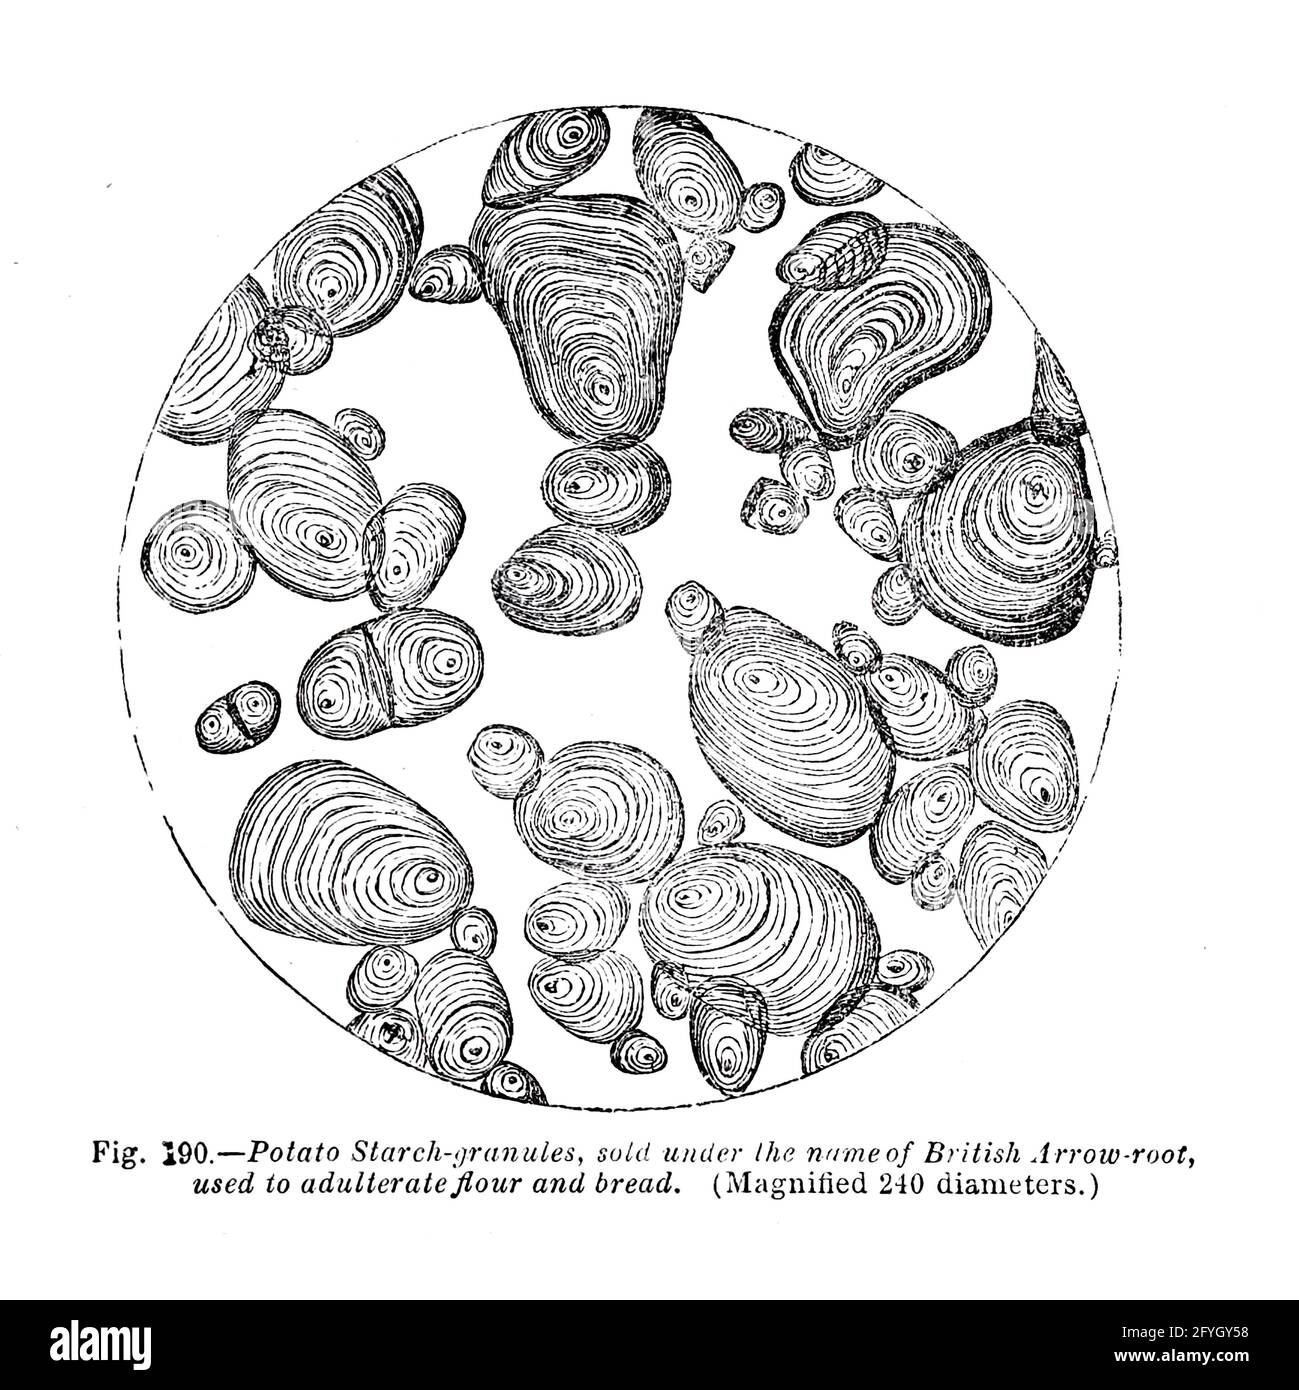 Cells under microscope From the book '  The microscope : its history, construction, and application ' by Hogg, Jabez, 1817-1899 Published in London by G. Routledge in 1869 with Illustrations by TUFFEN WEST Stock Photo